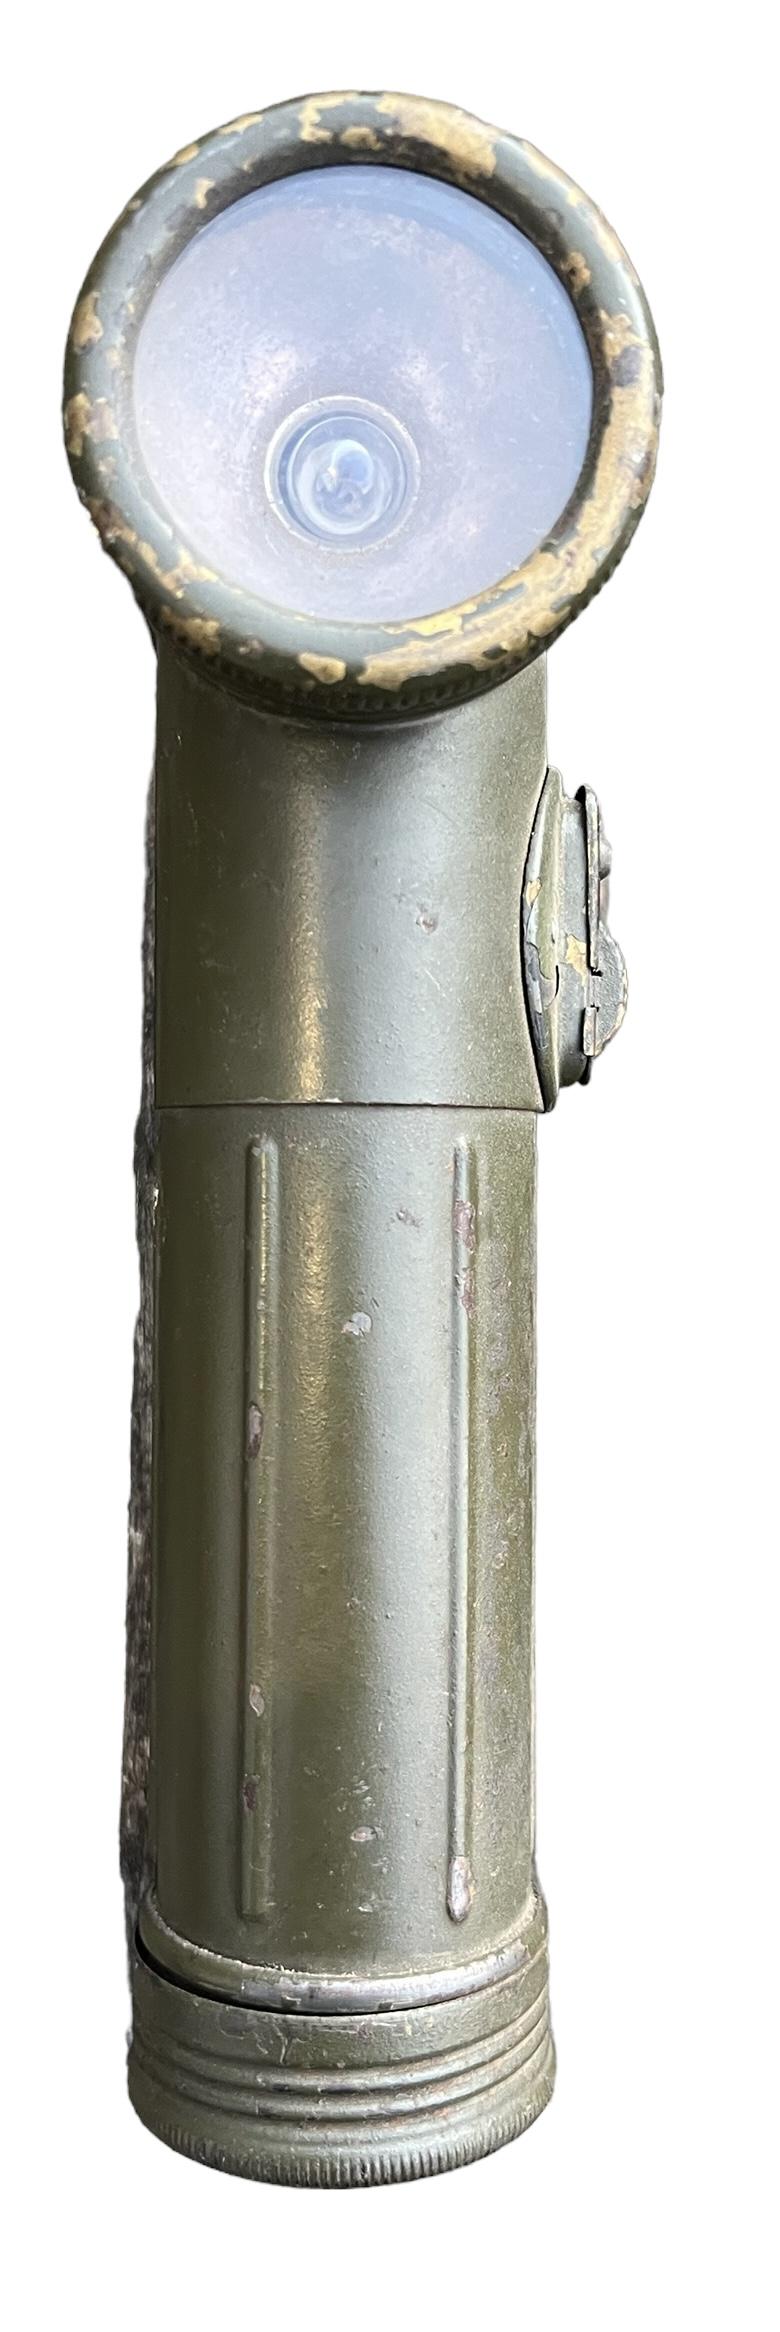 U.S. and/or British (Airborne) TL122(A) Torch - Nice Used Condition